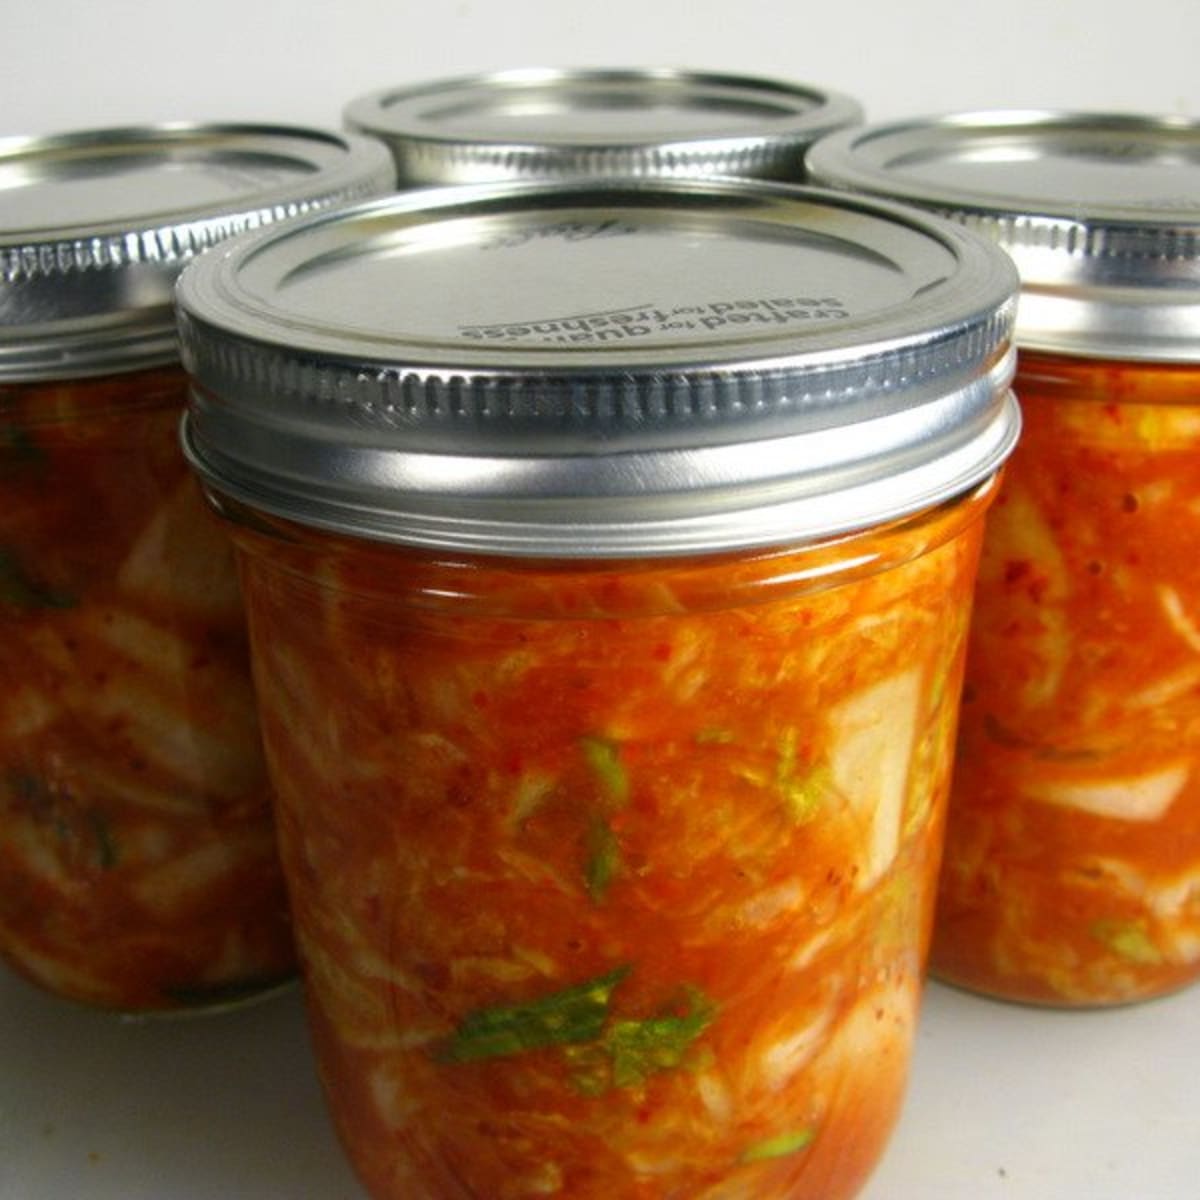 10 Fermented Foods You Easily Make at Home - Organic Authority